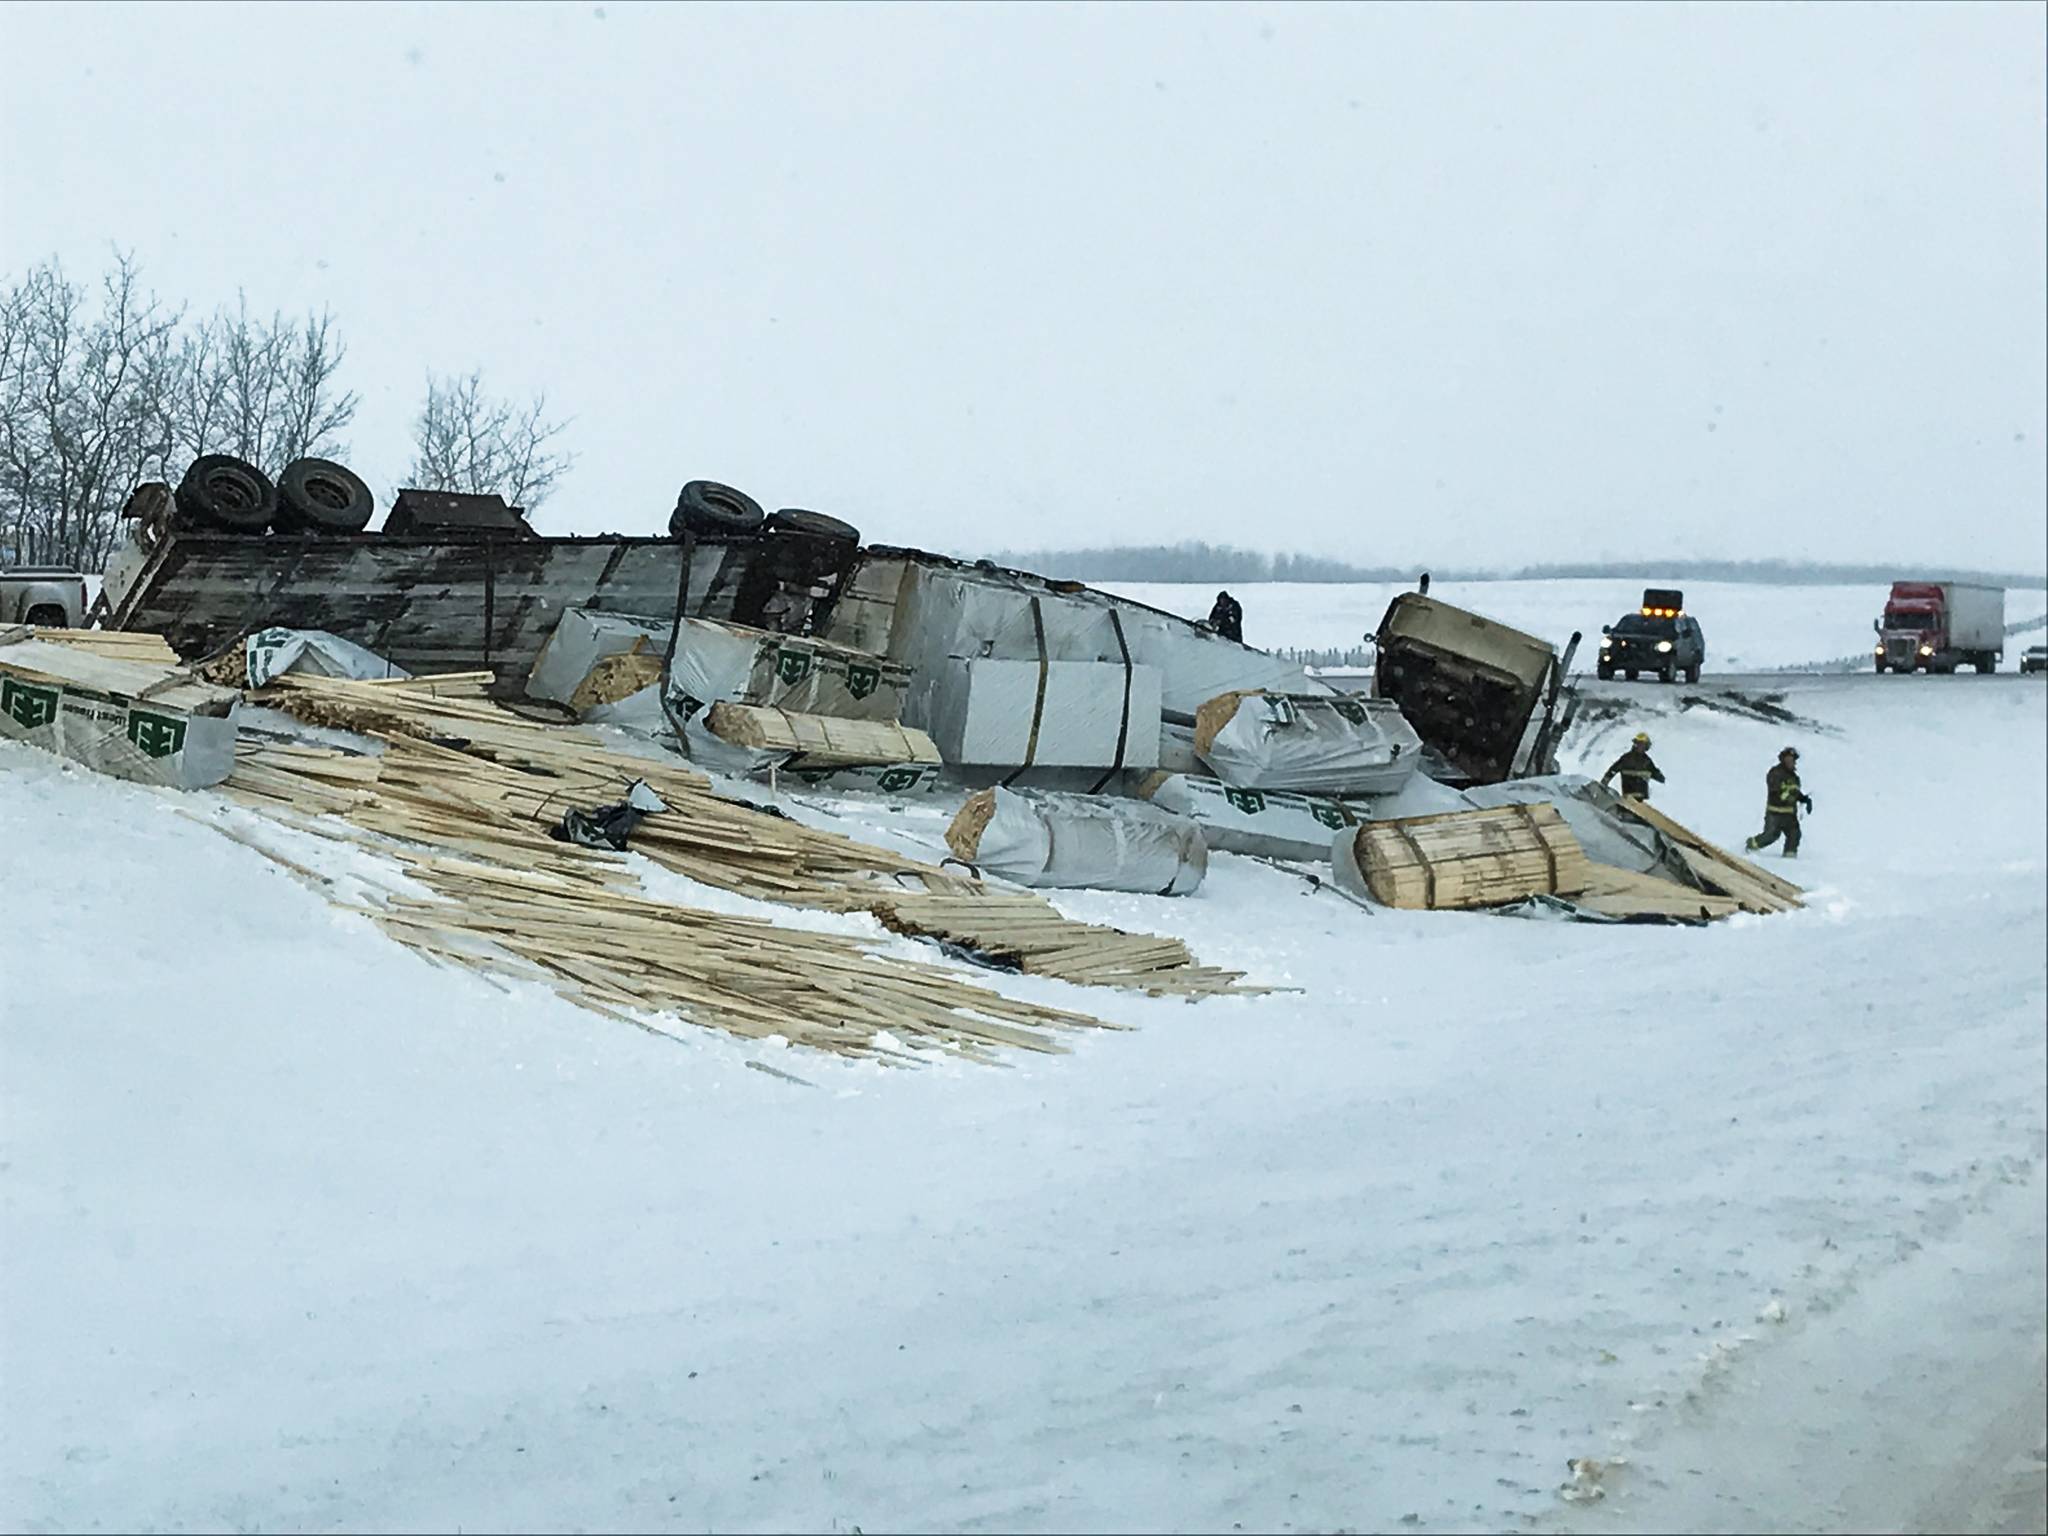 Semi loses lumber on QE2: Wintry road conditions on the QE2 near Ponoka continued to wreak havoc for motorists. At about 10:45 a.m. Friday morning a southbound semi tractor hauling lumber rolled in the median just north of Ponoka.                                Photos submitted